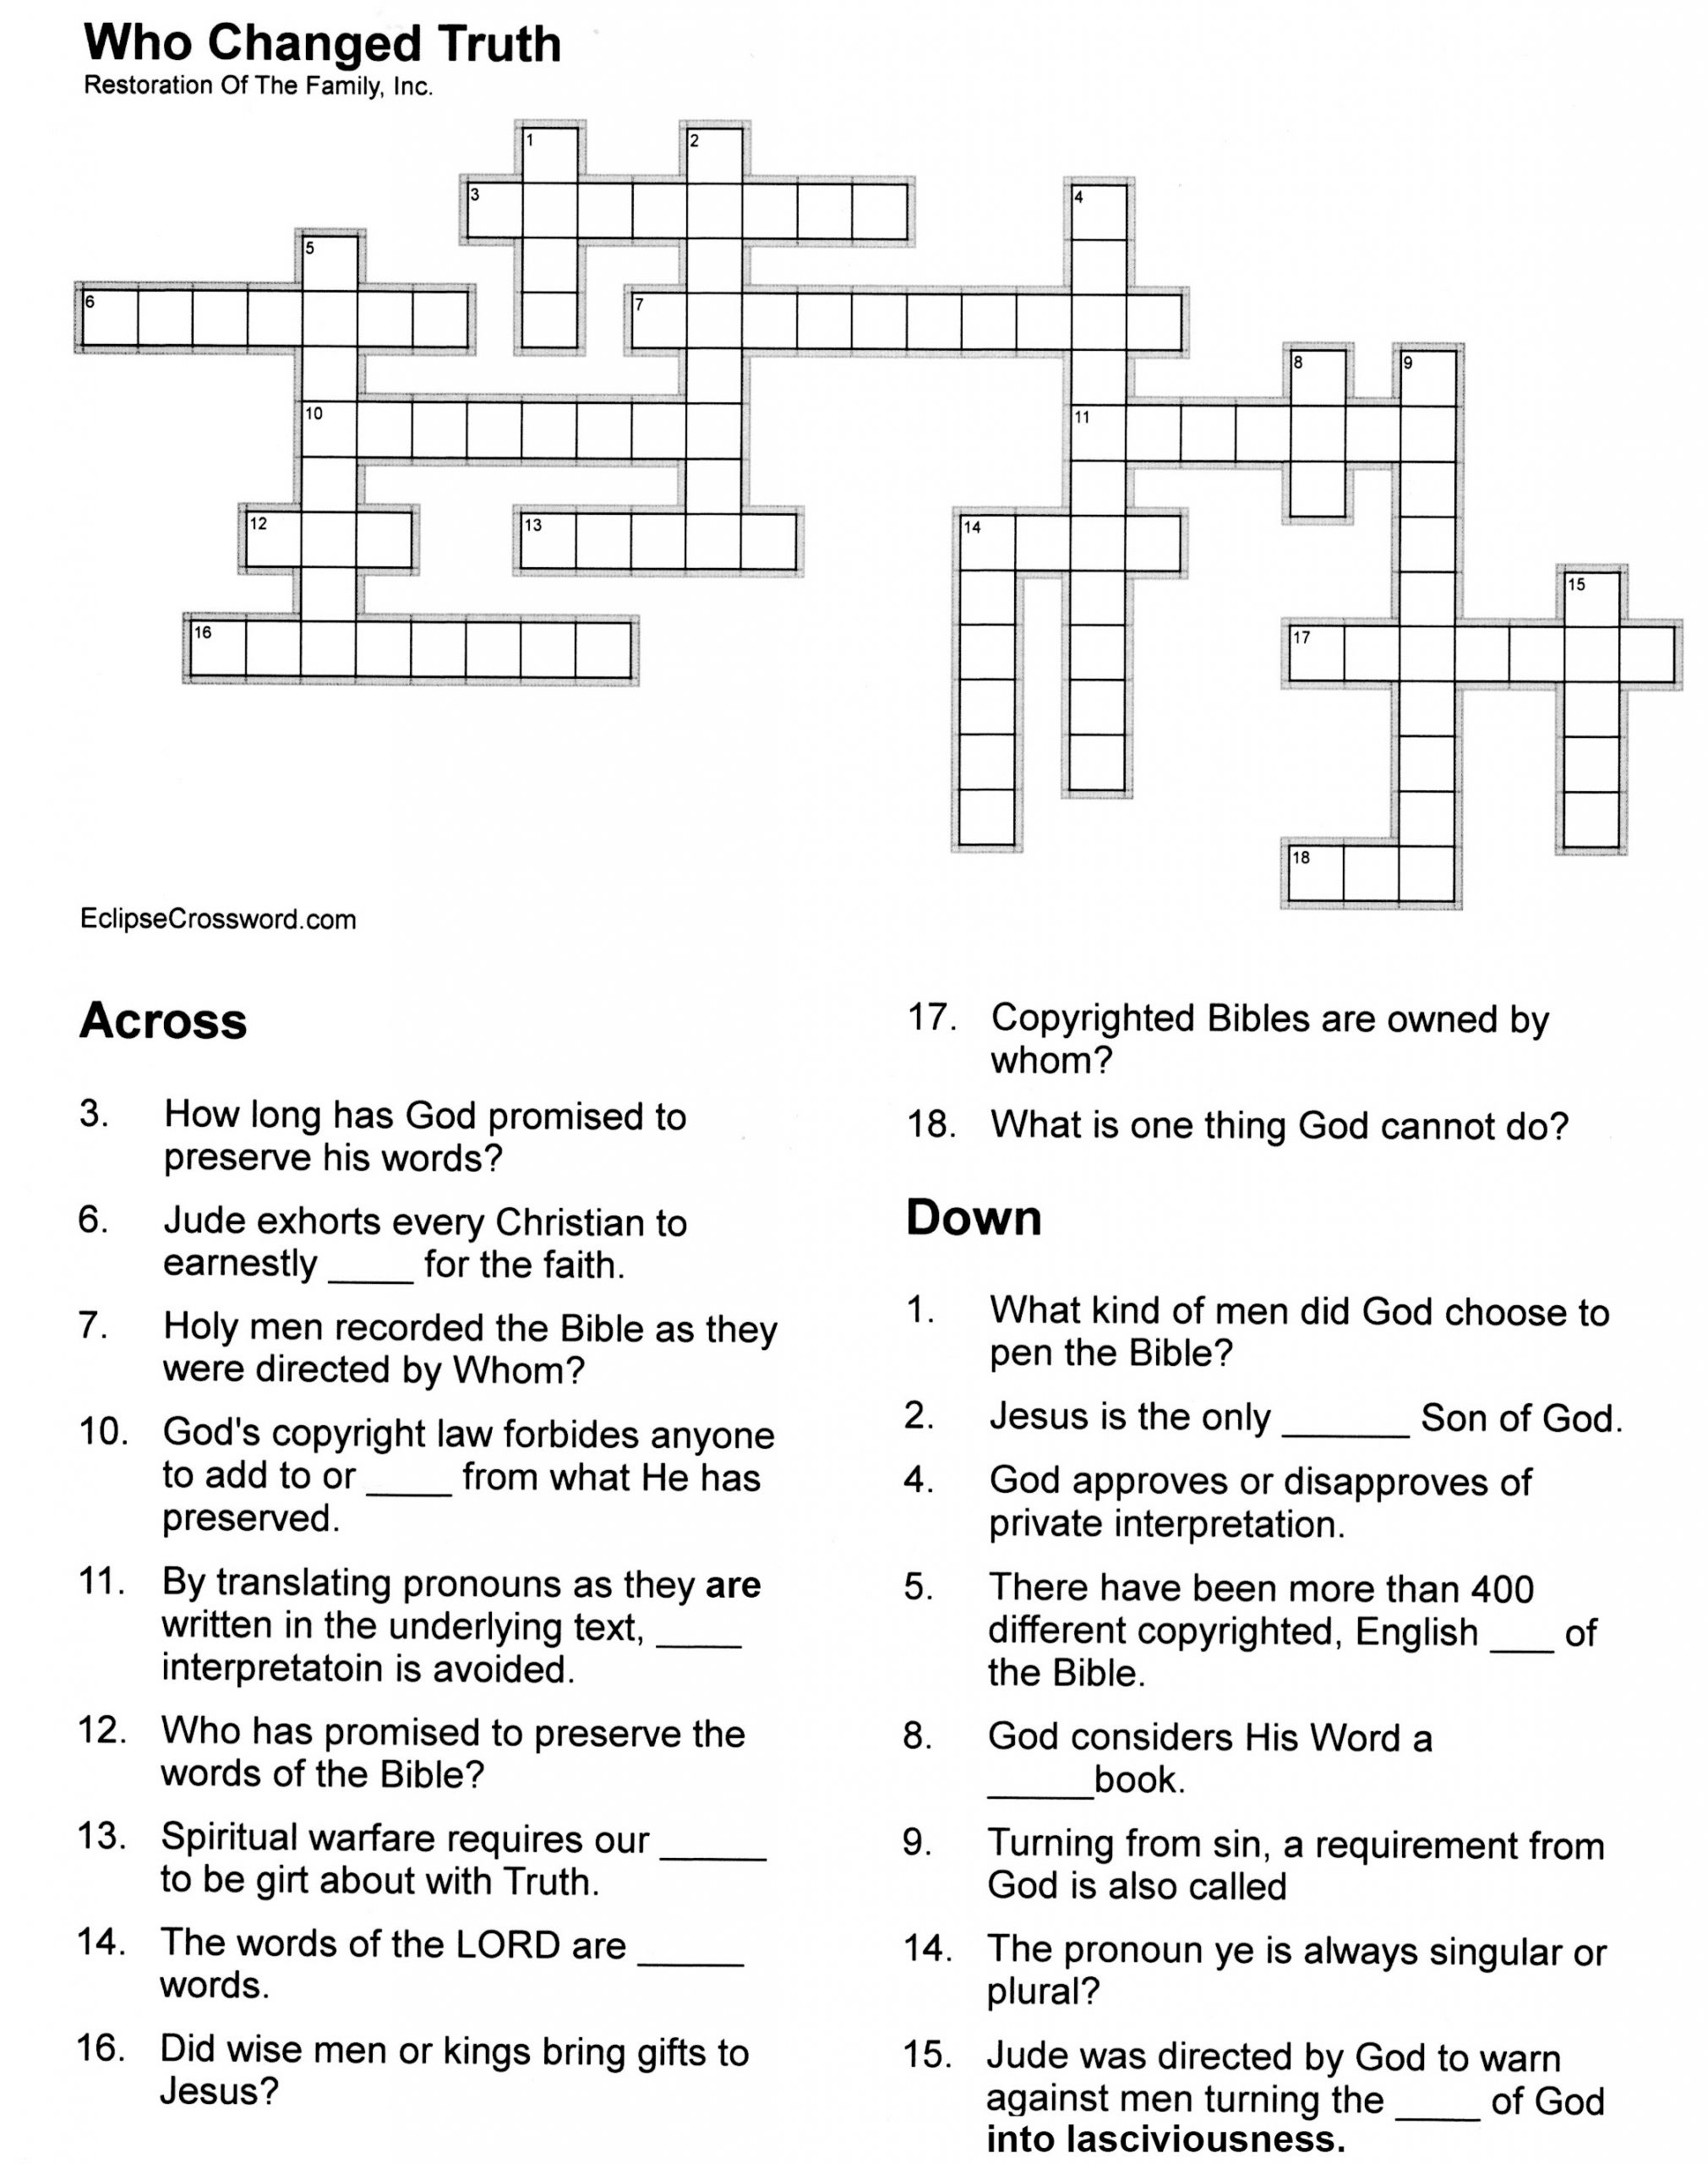 Puzzle based on Study Questions